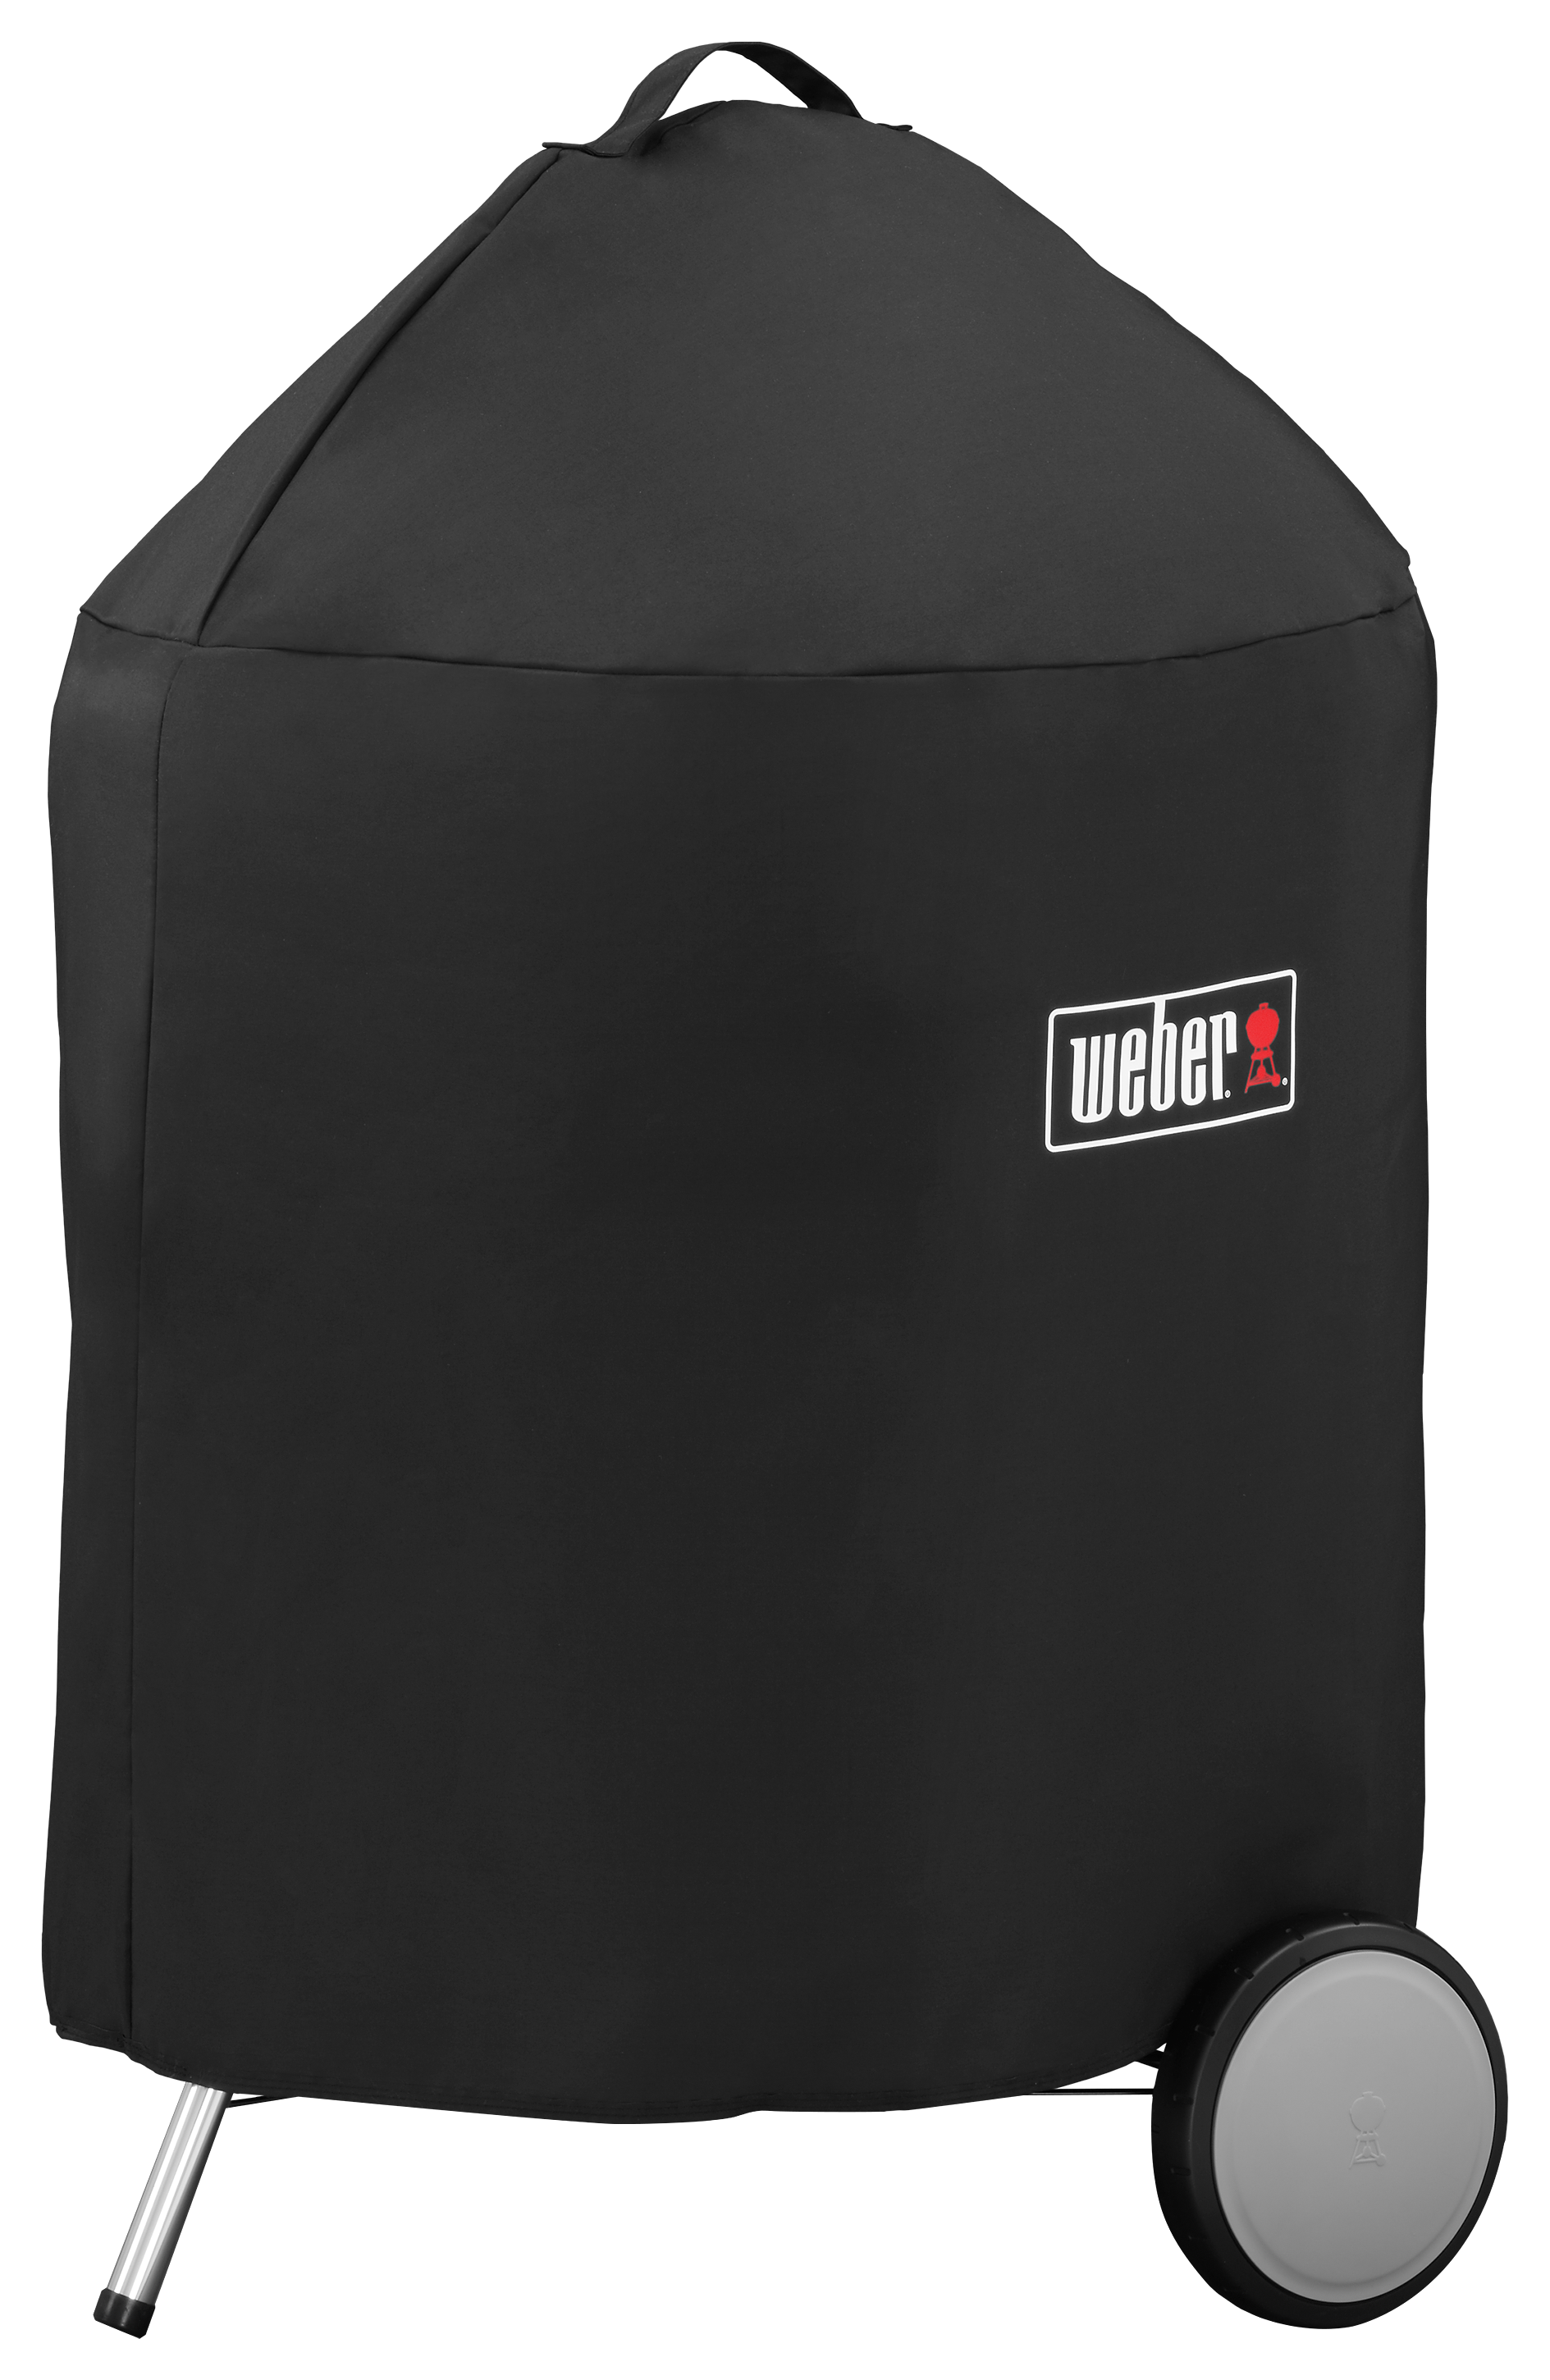 Weber Premium 22"" Charcoal Grill Cover